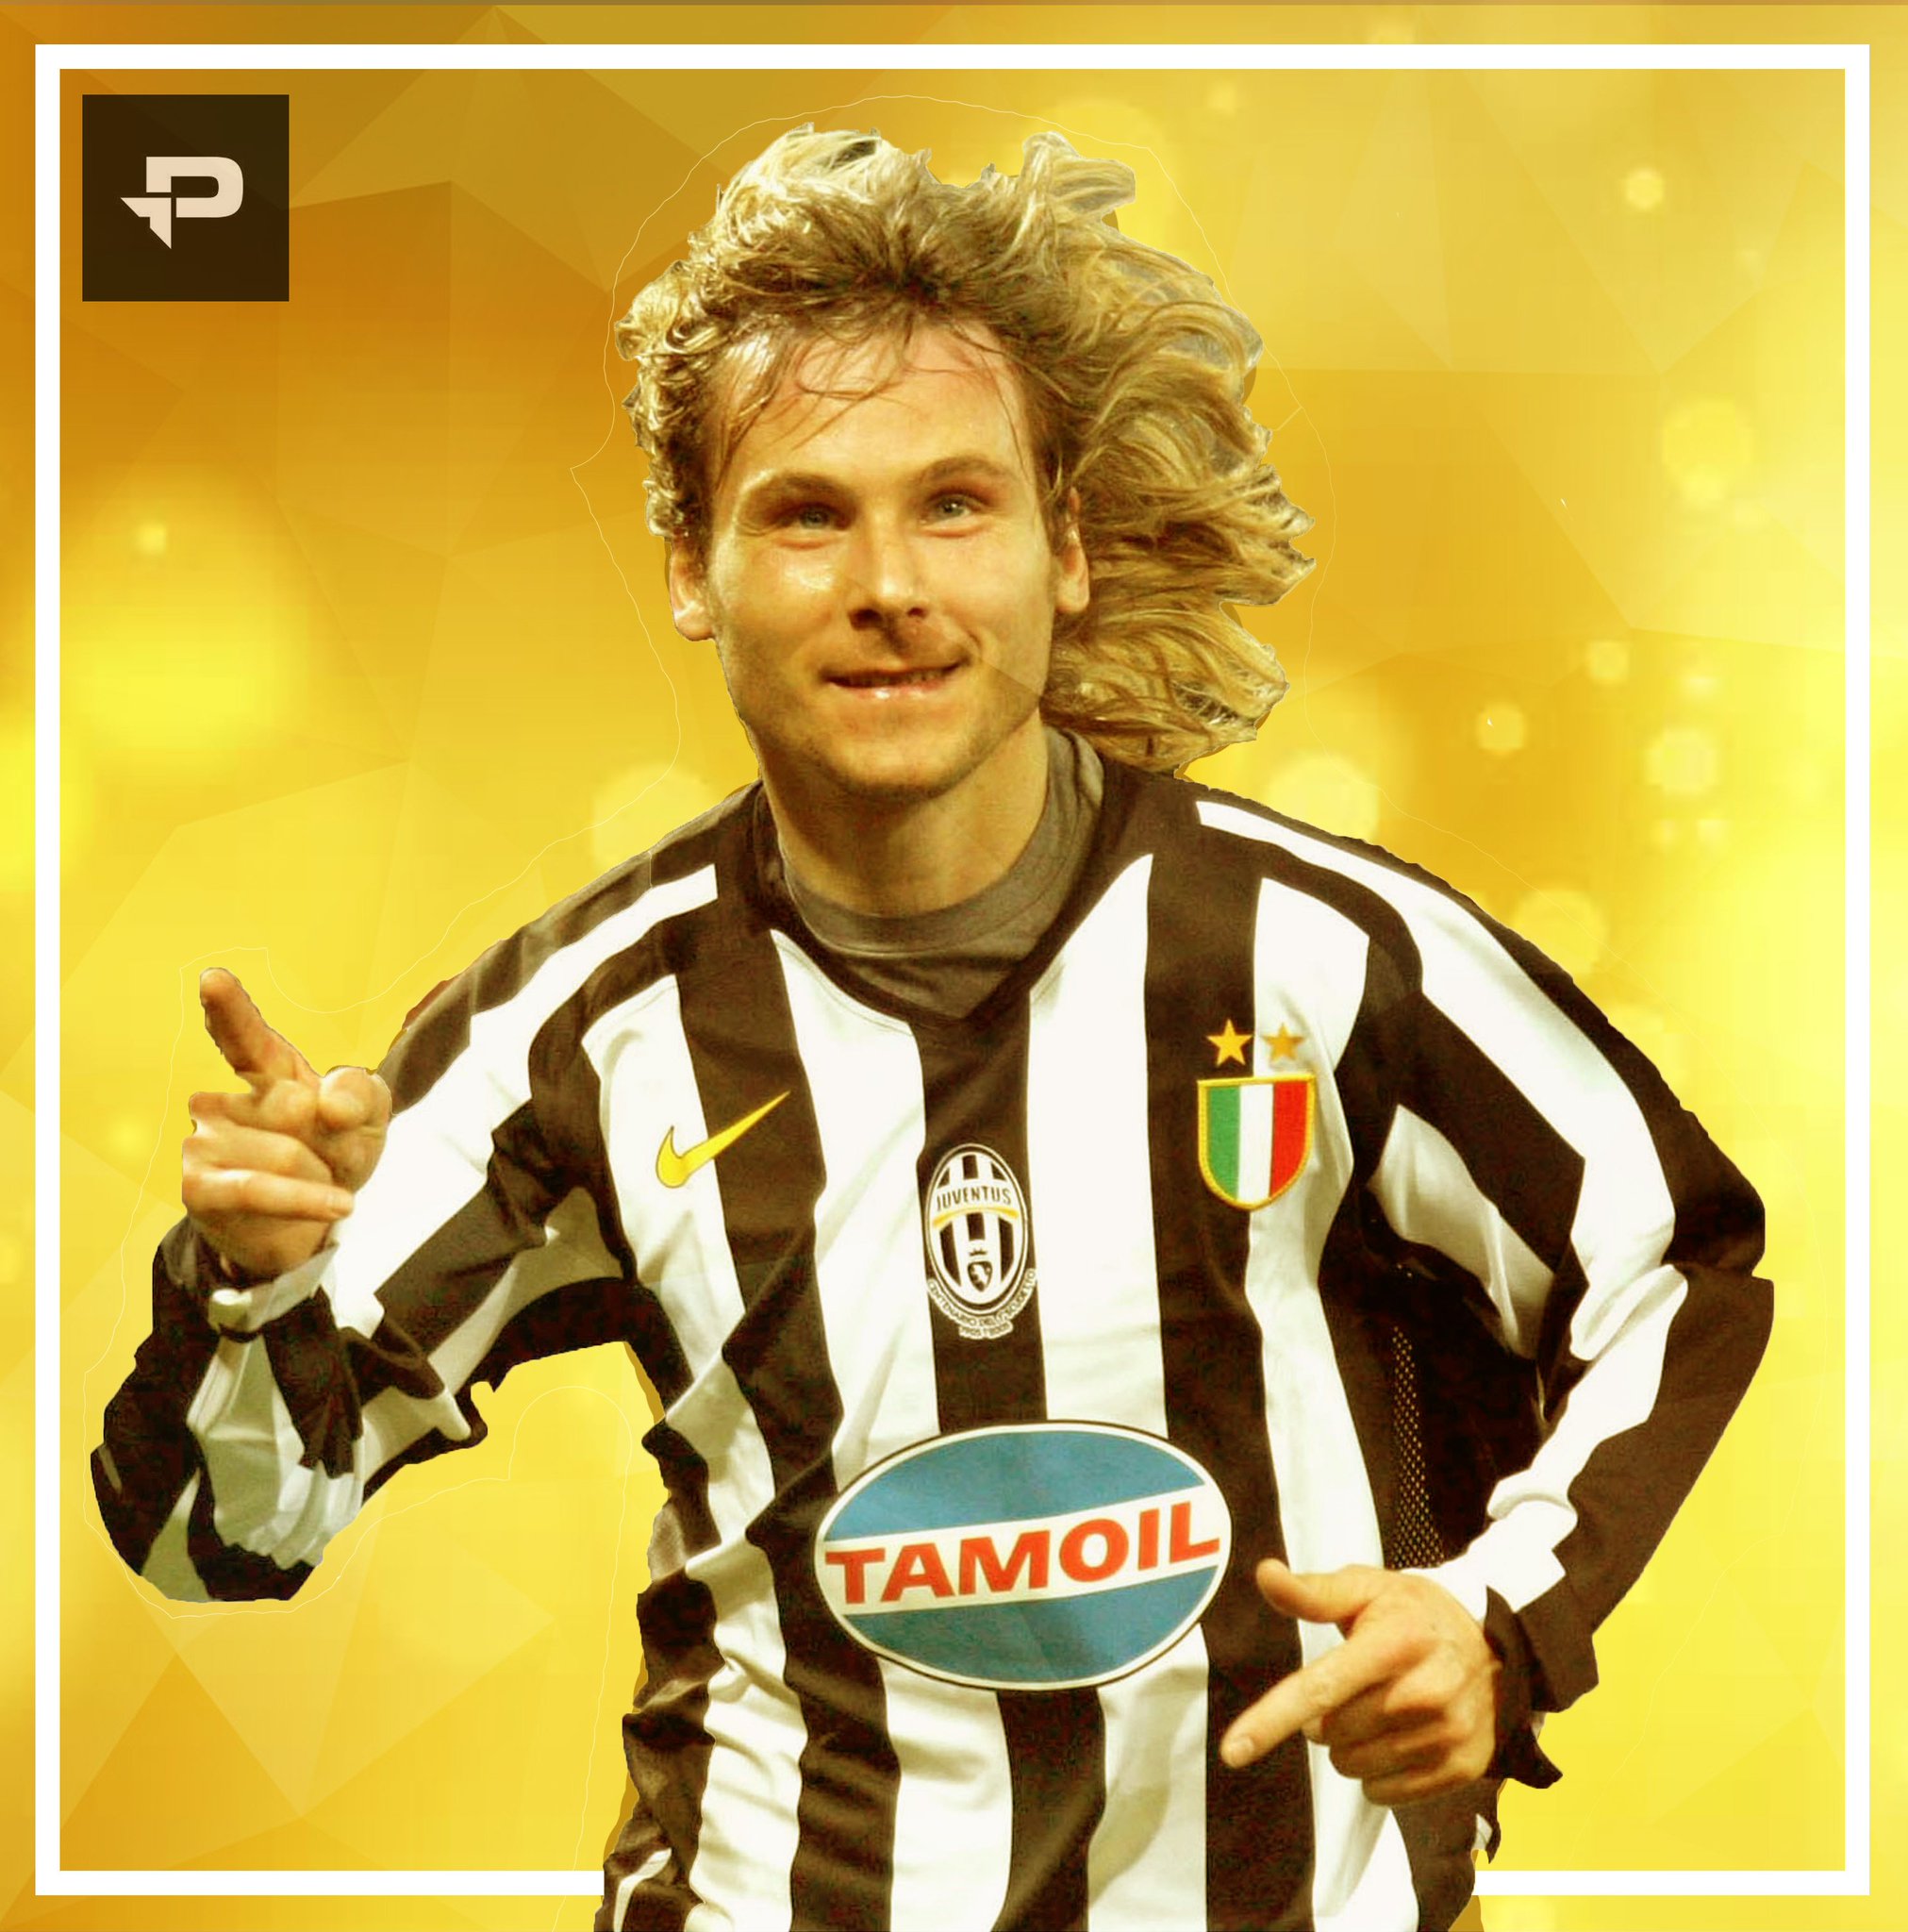 Happy Birthday to the Czech cannon Pavel Nedvêd, what a sensational player this man was. 